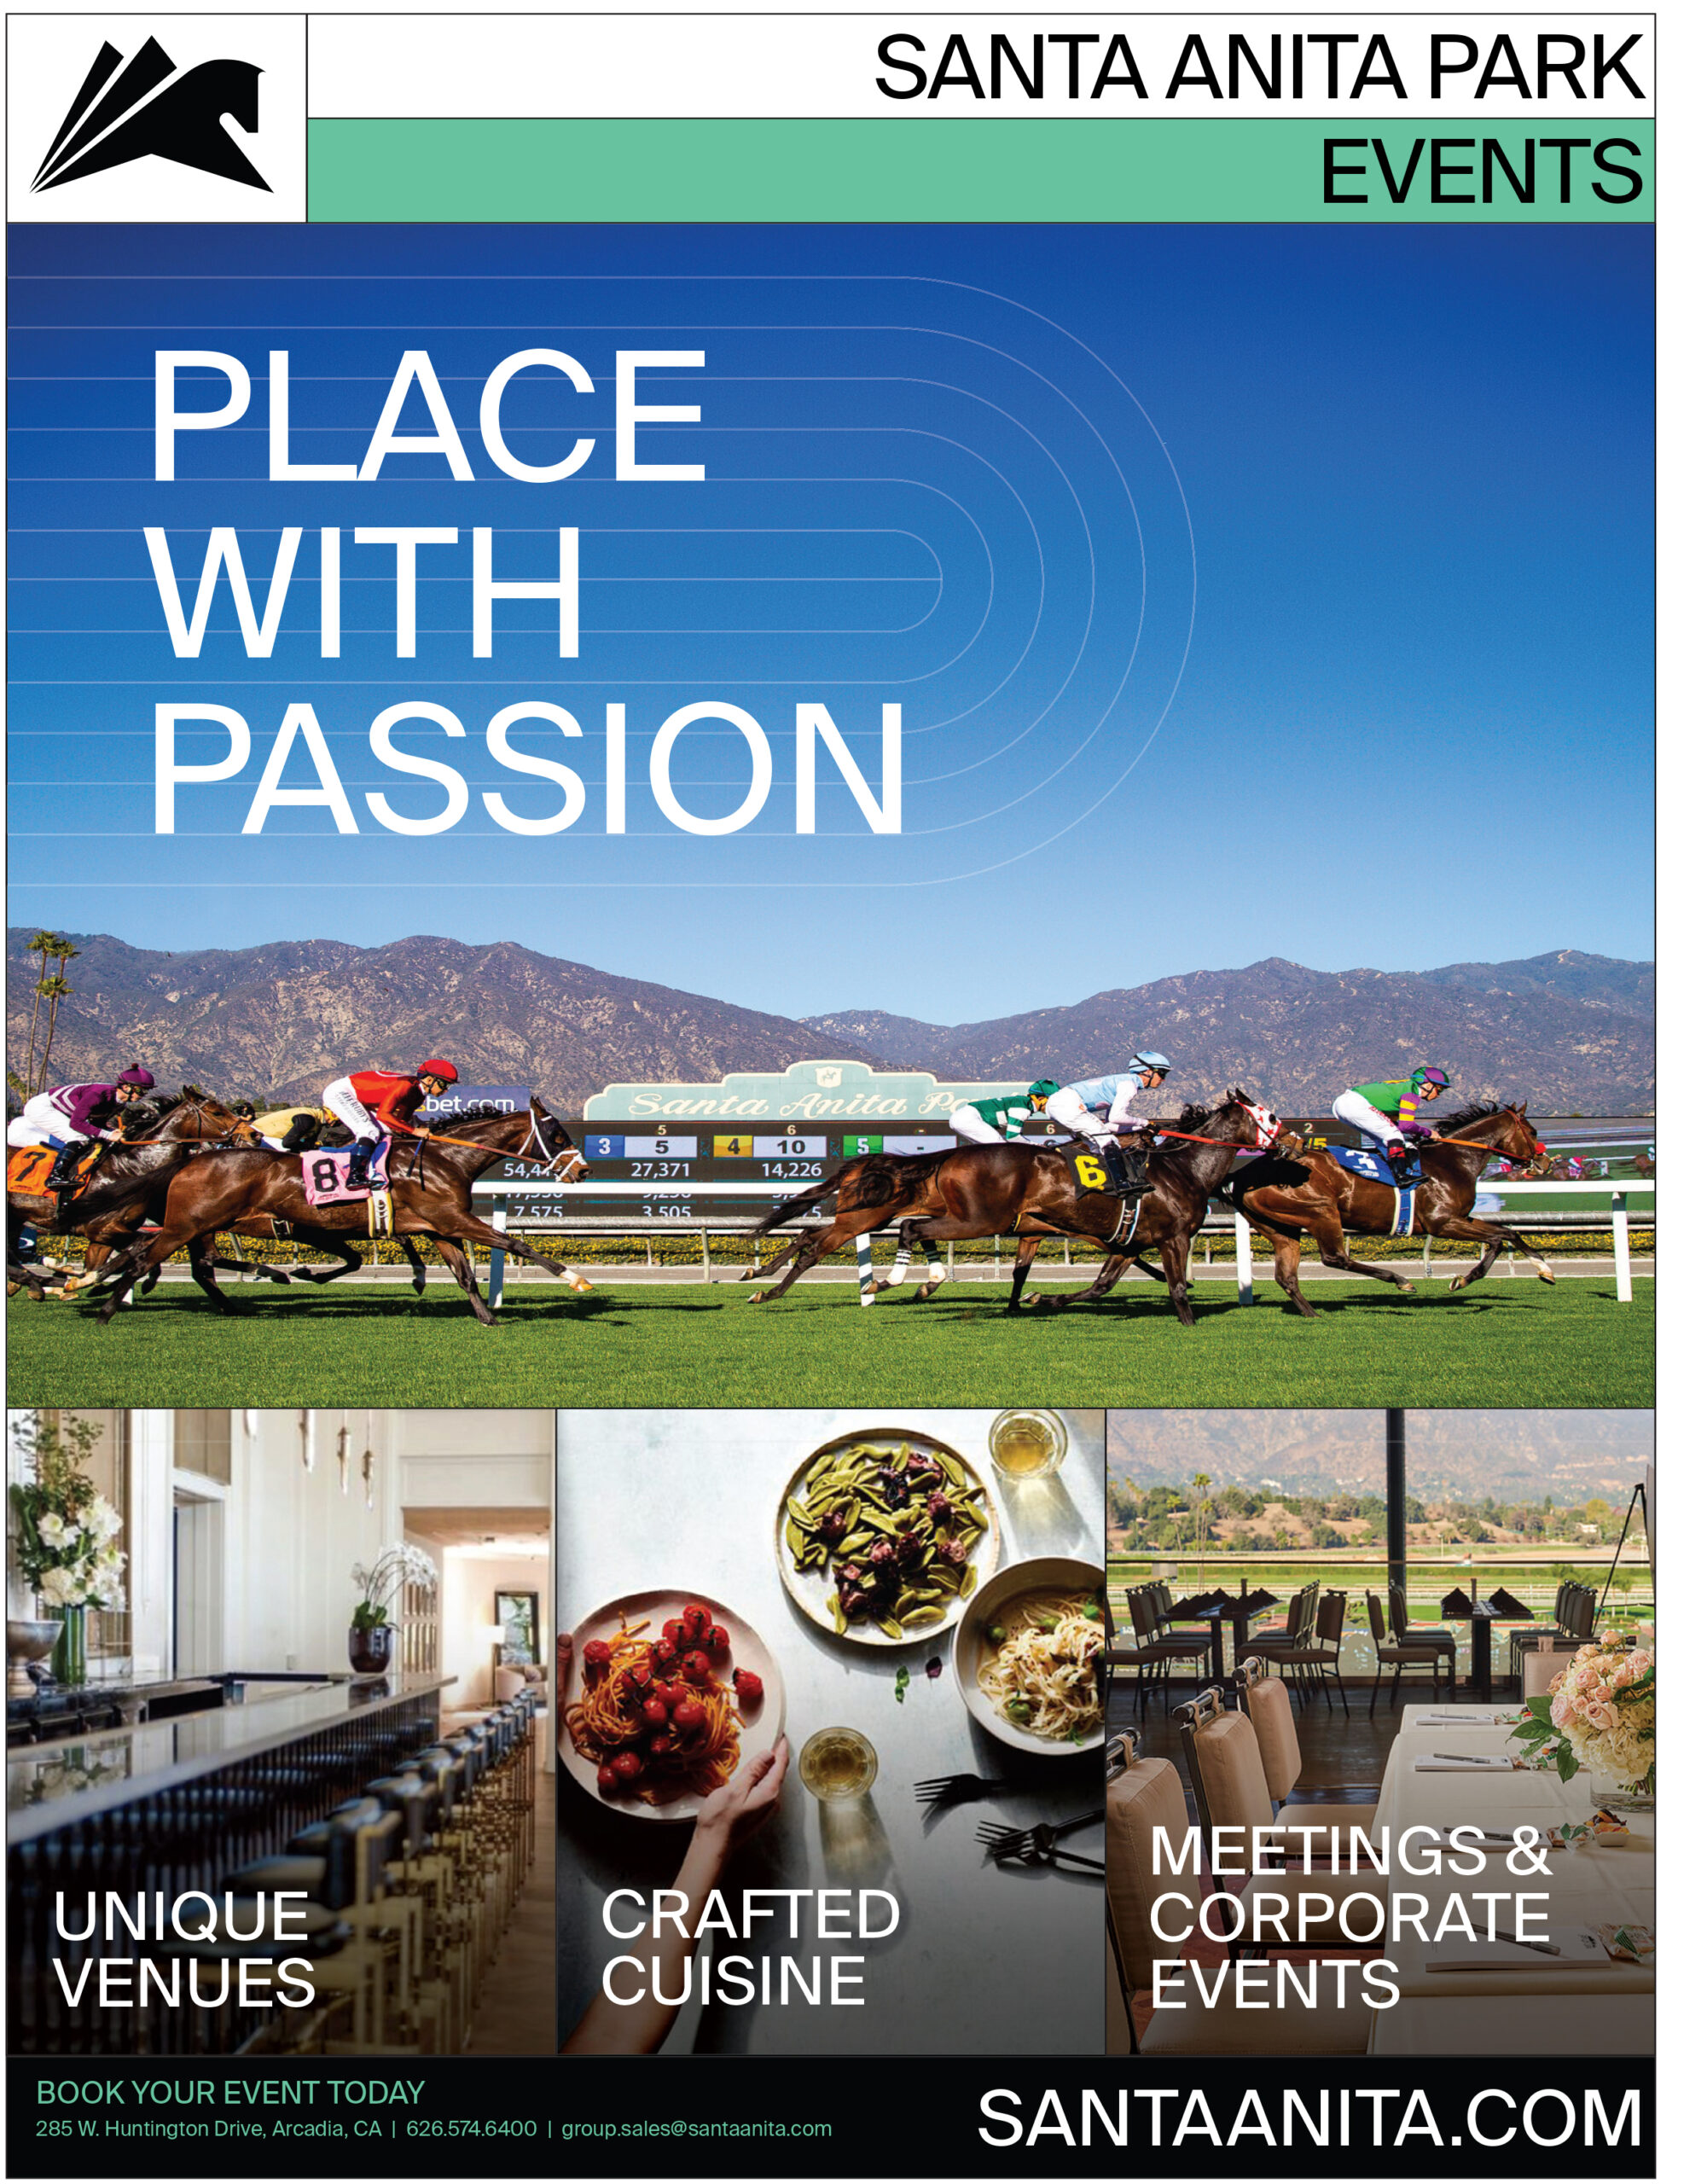 Santa Anita a place with passion flyer with racing horses